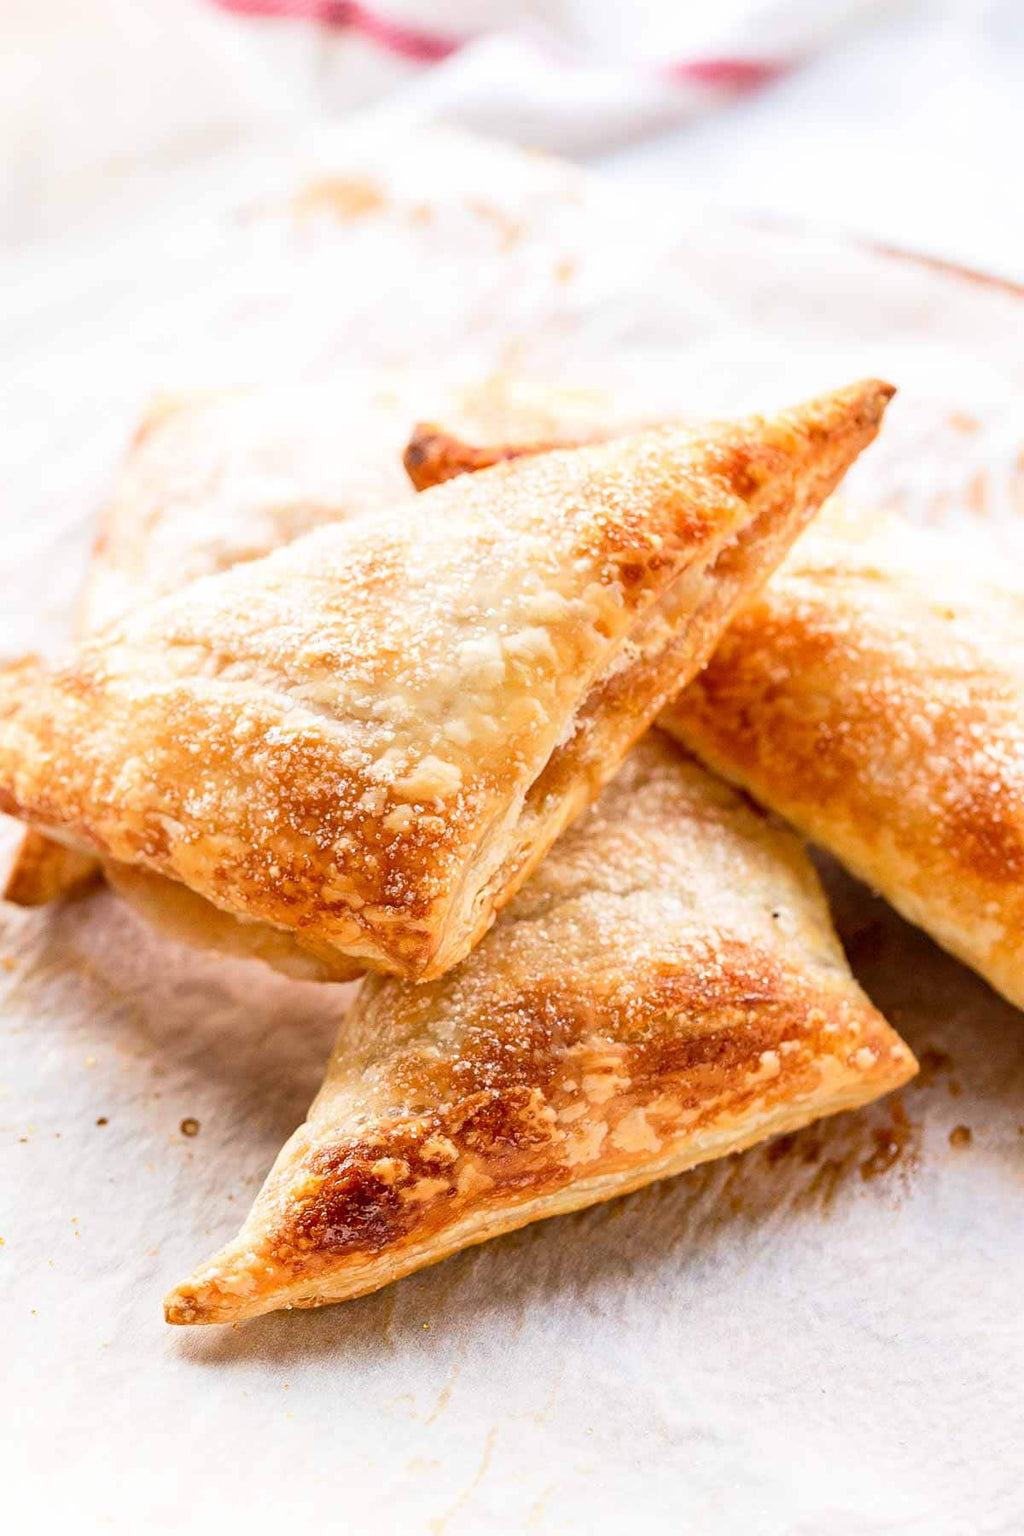 Apple Turnover I Chausson aux Pommes